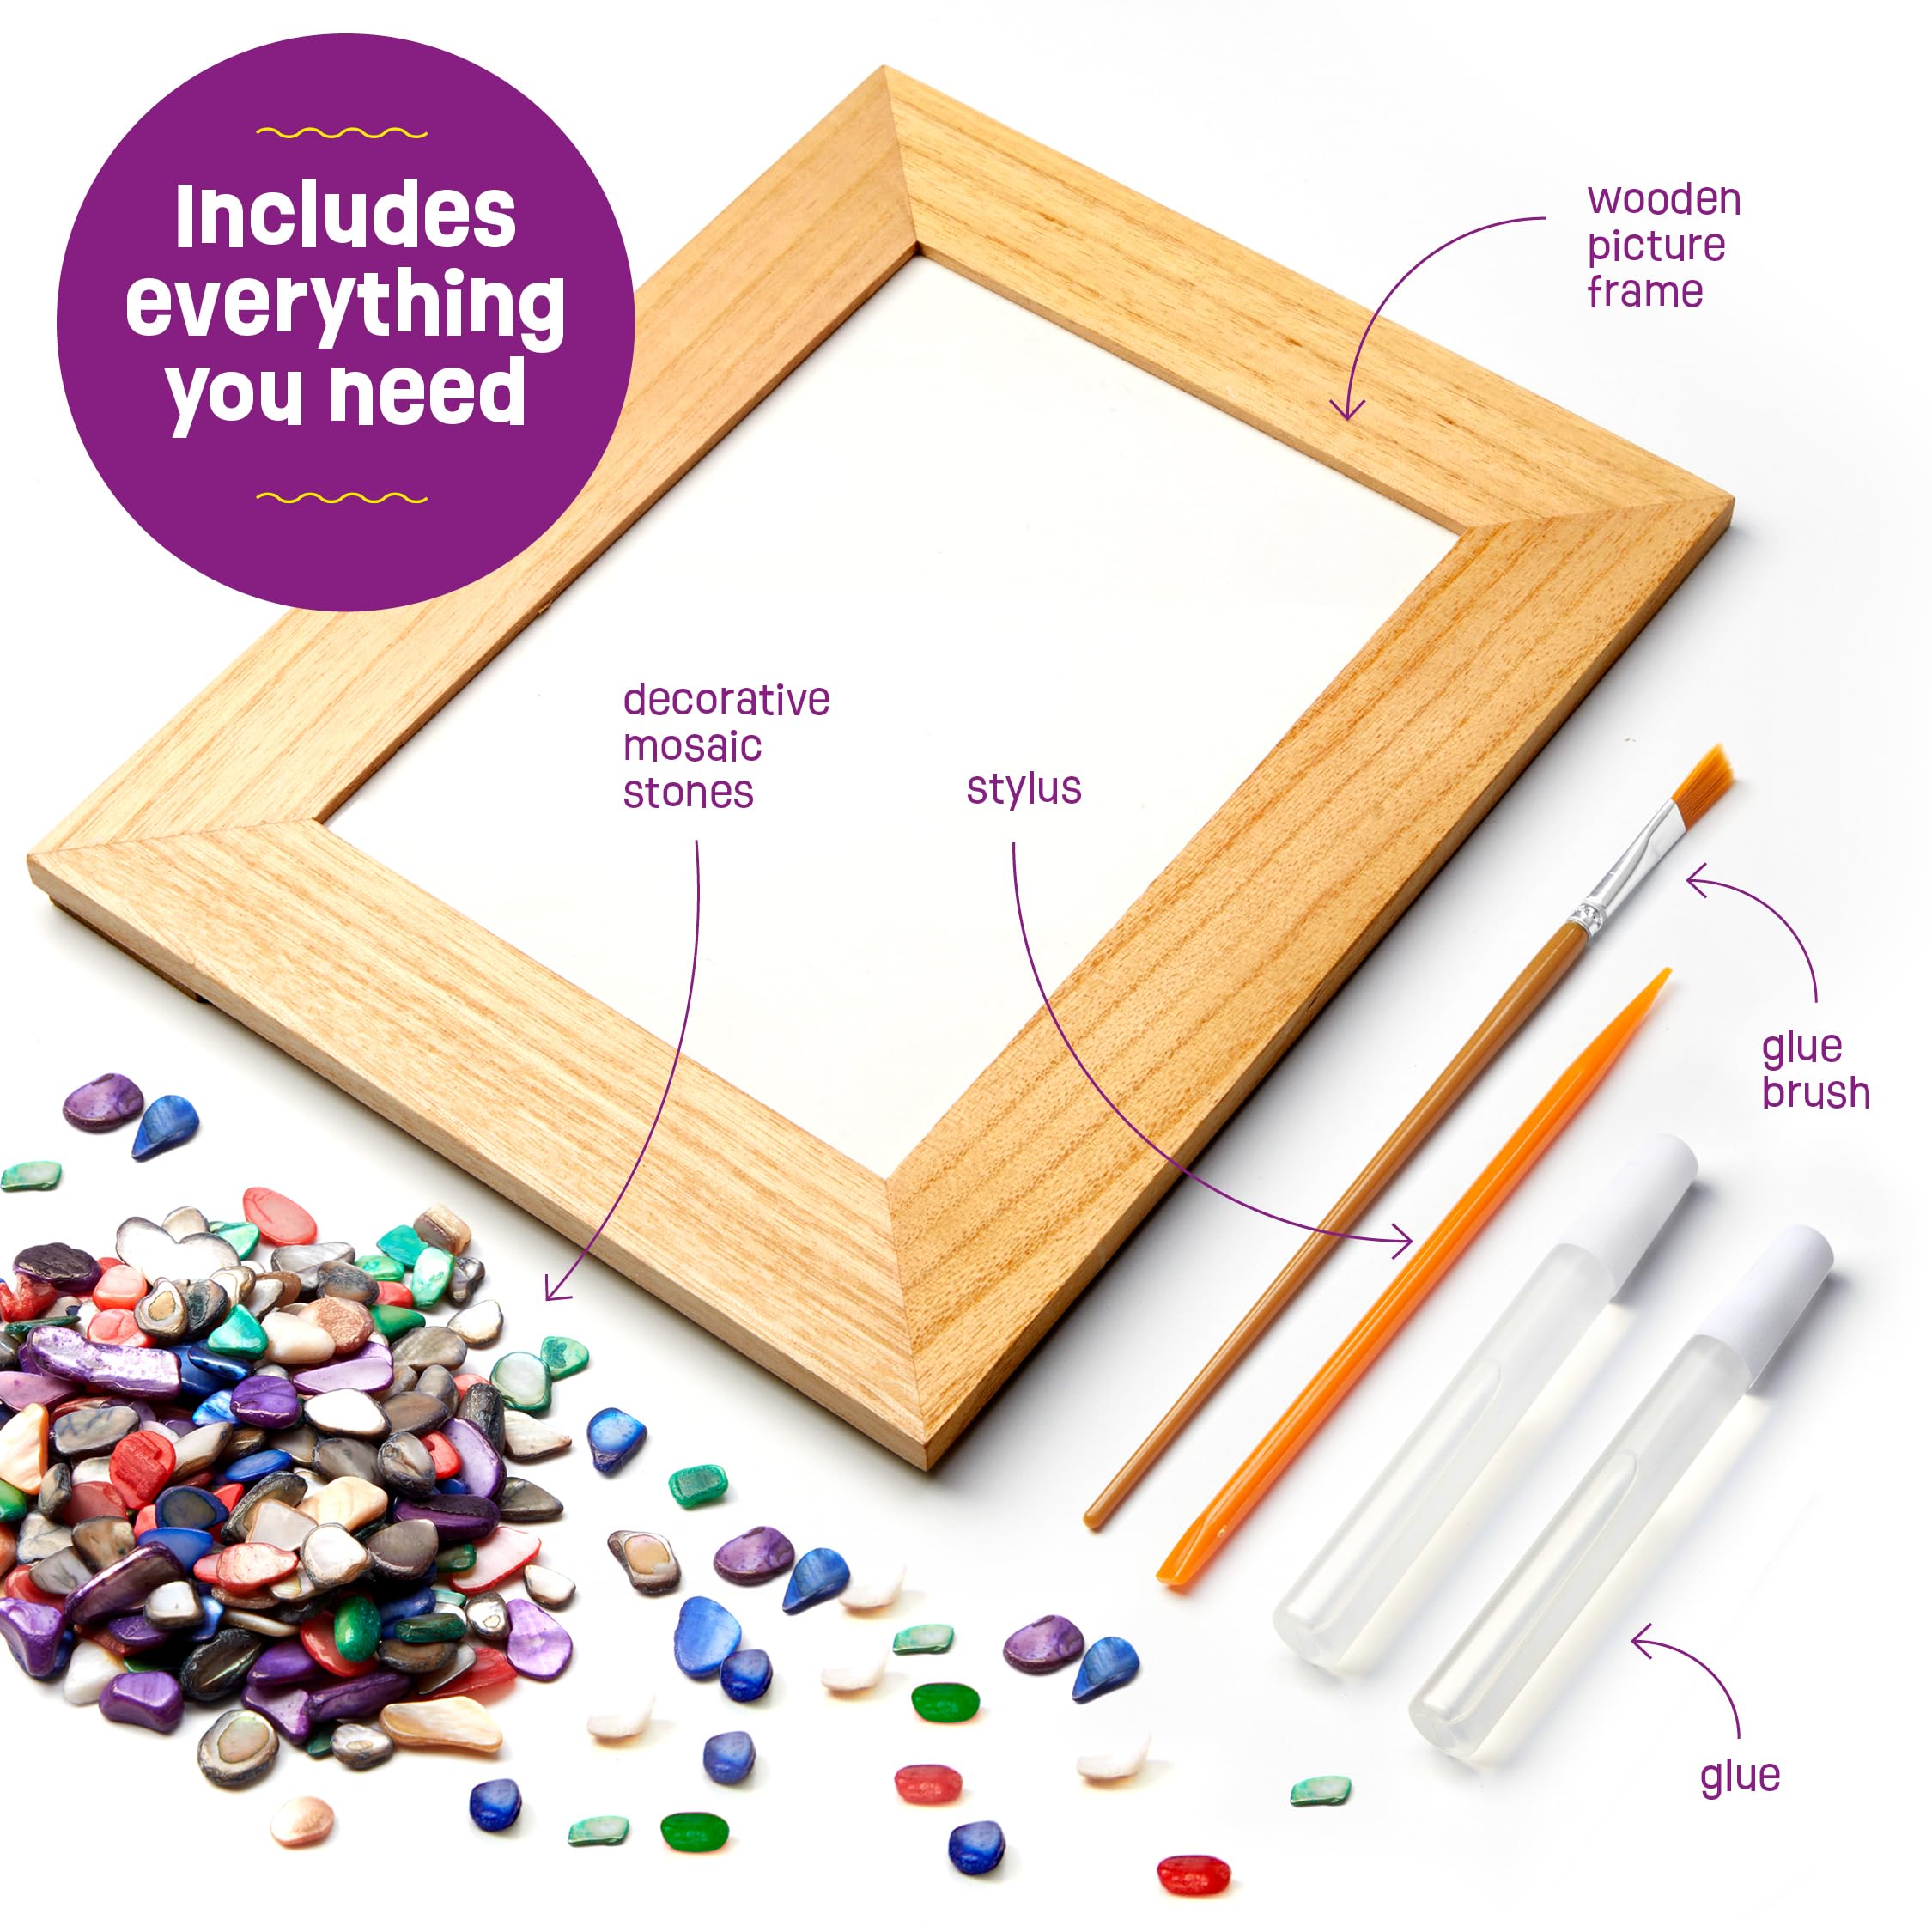 DIY Mosaic Picture Frame Kit for Kids - Arts and Craft Kits for Girls & Boys - Crafts for 6-14 Year Old - Photo Birthday Gifts for Ages 6, 7, 8, 9, 10, 11, 12, Gift for Teens, Tweens, 6-8, 8-12, 10-12